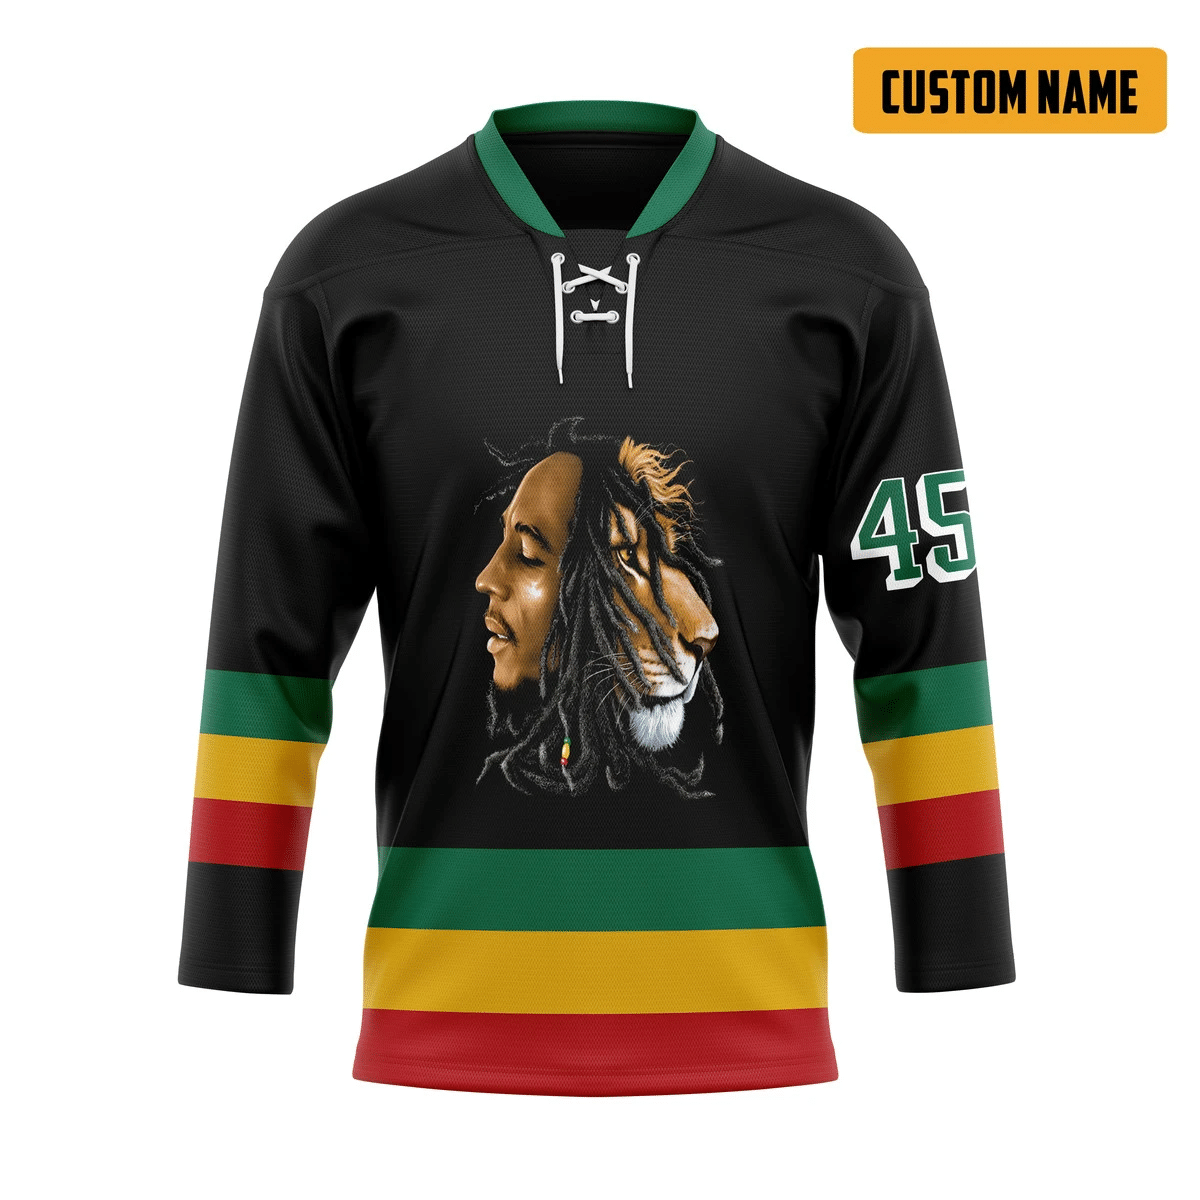 The hockey jersey is a must for every player in a team. 83